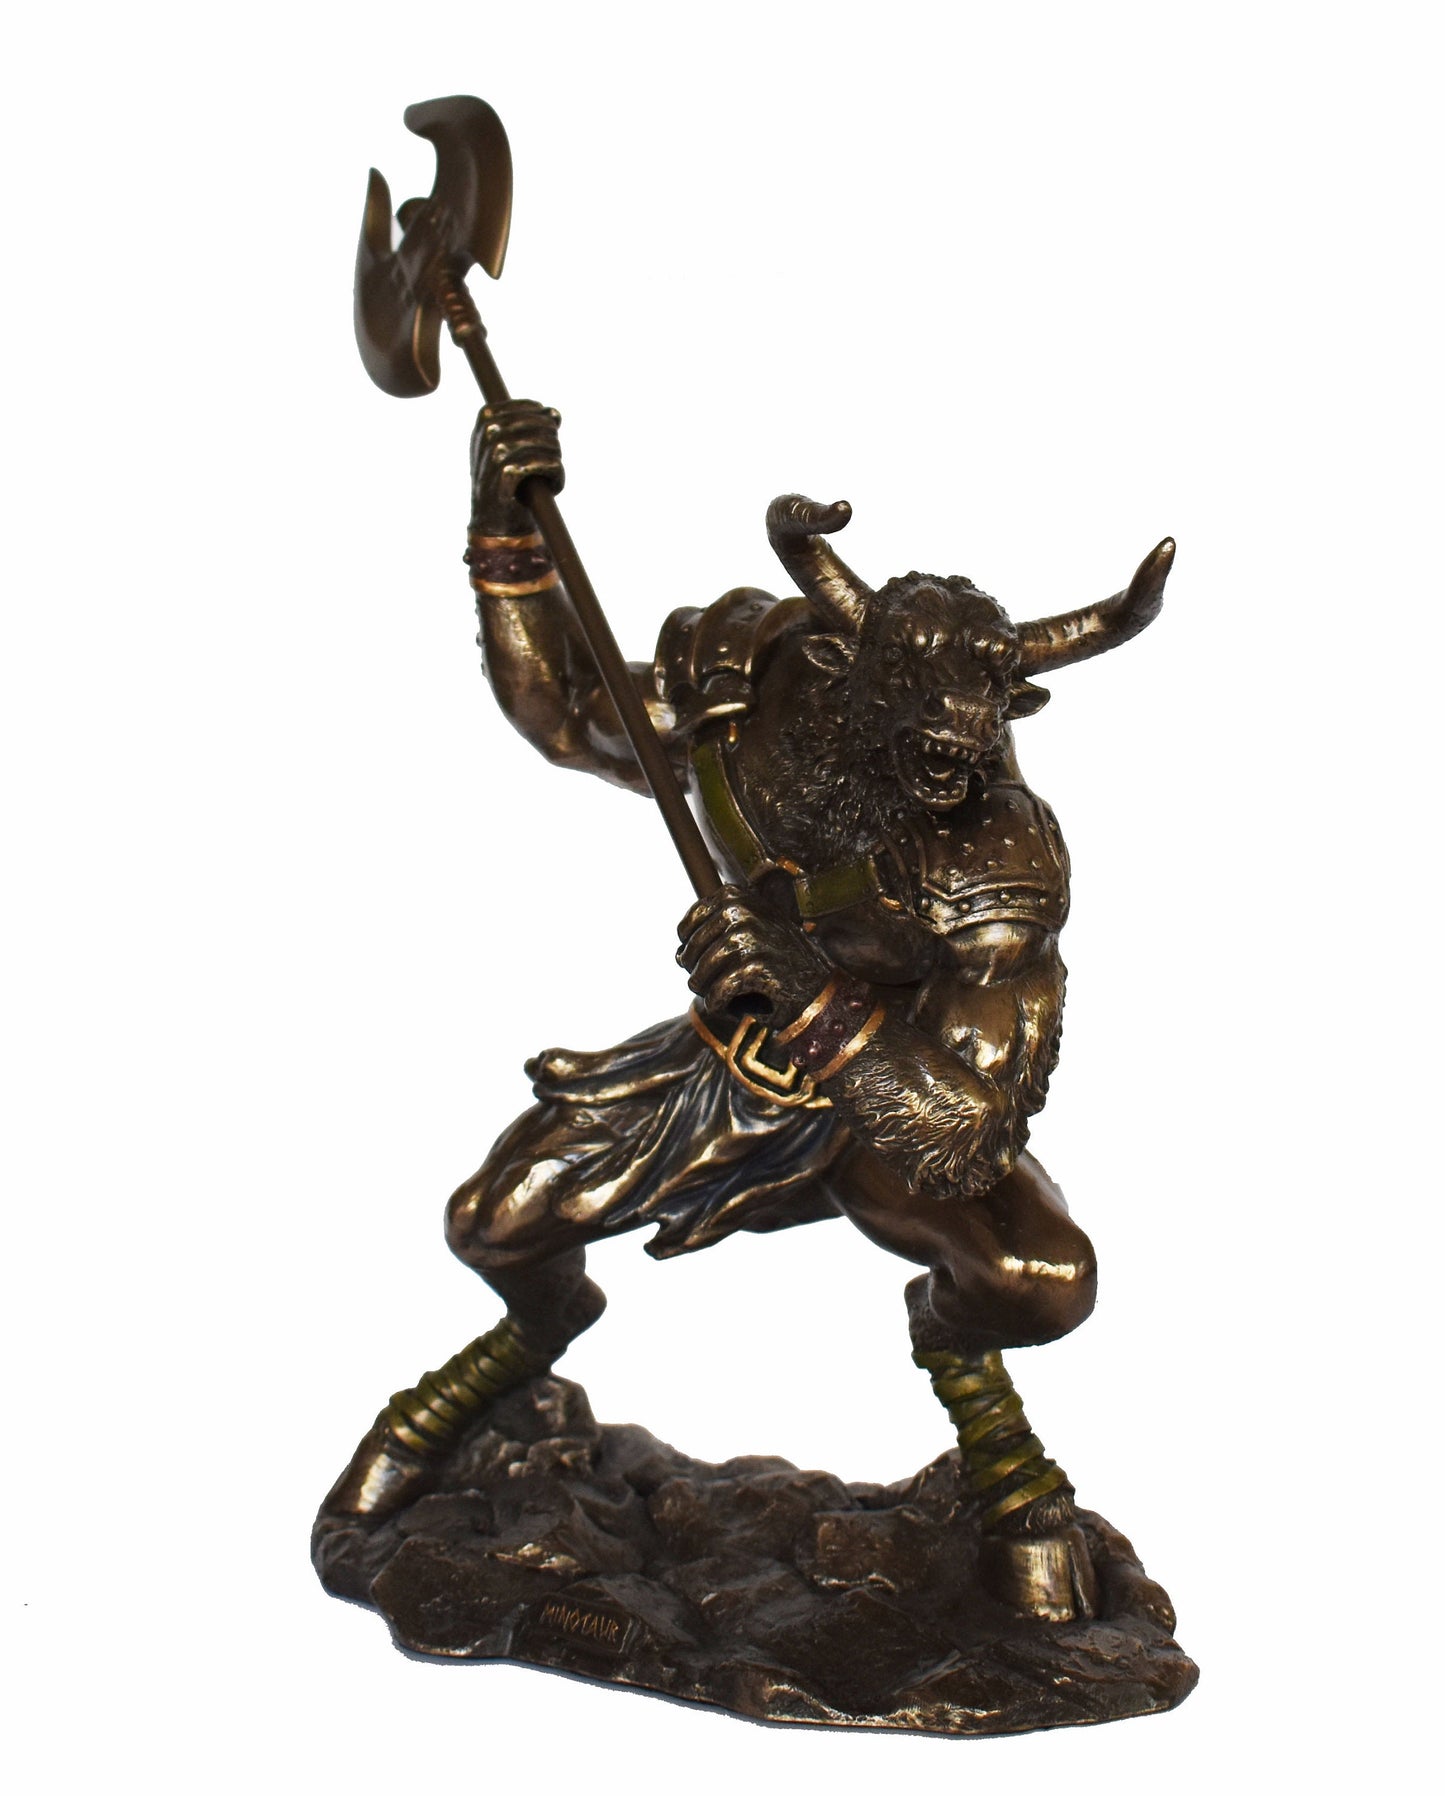 Minotaur - Mythical Creature, Half-Man, Half-Bull - Fierce and Very Strong - Labyrinth, King Minos, Crete, Theseus - Cold Cast Bronze Resin